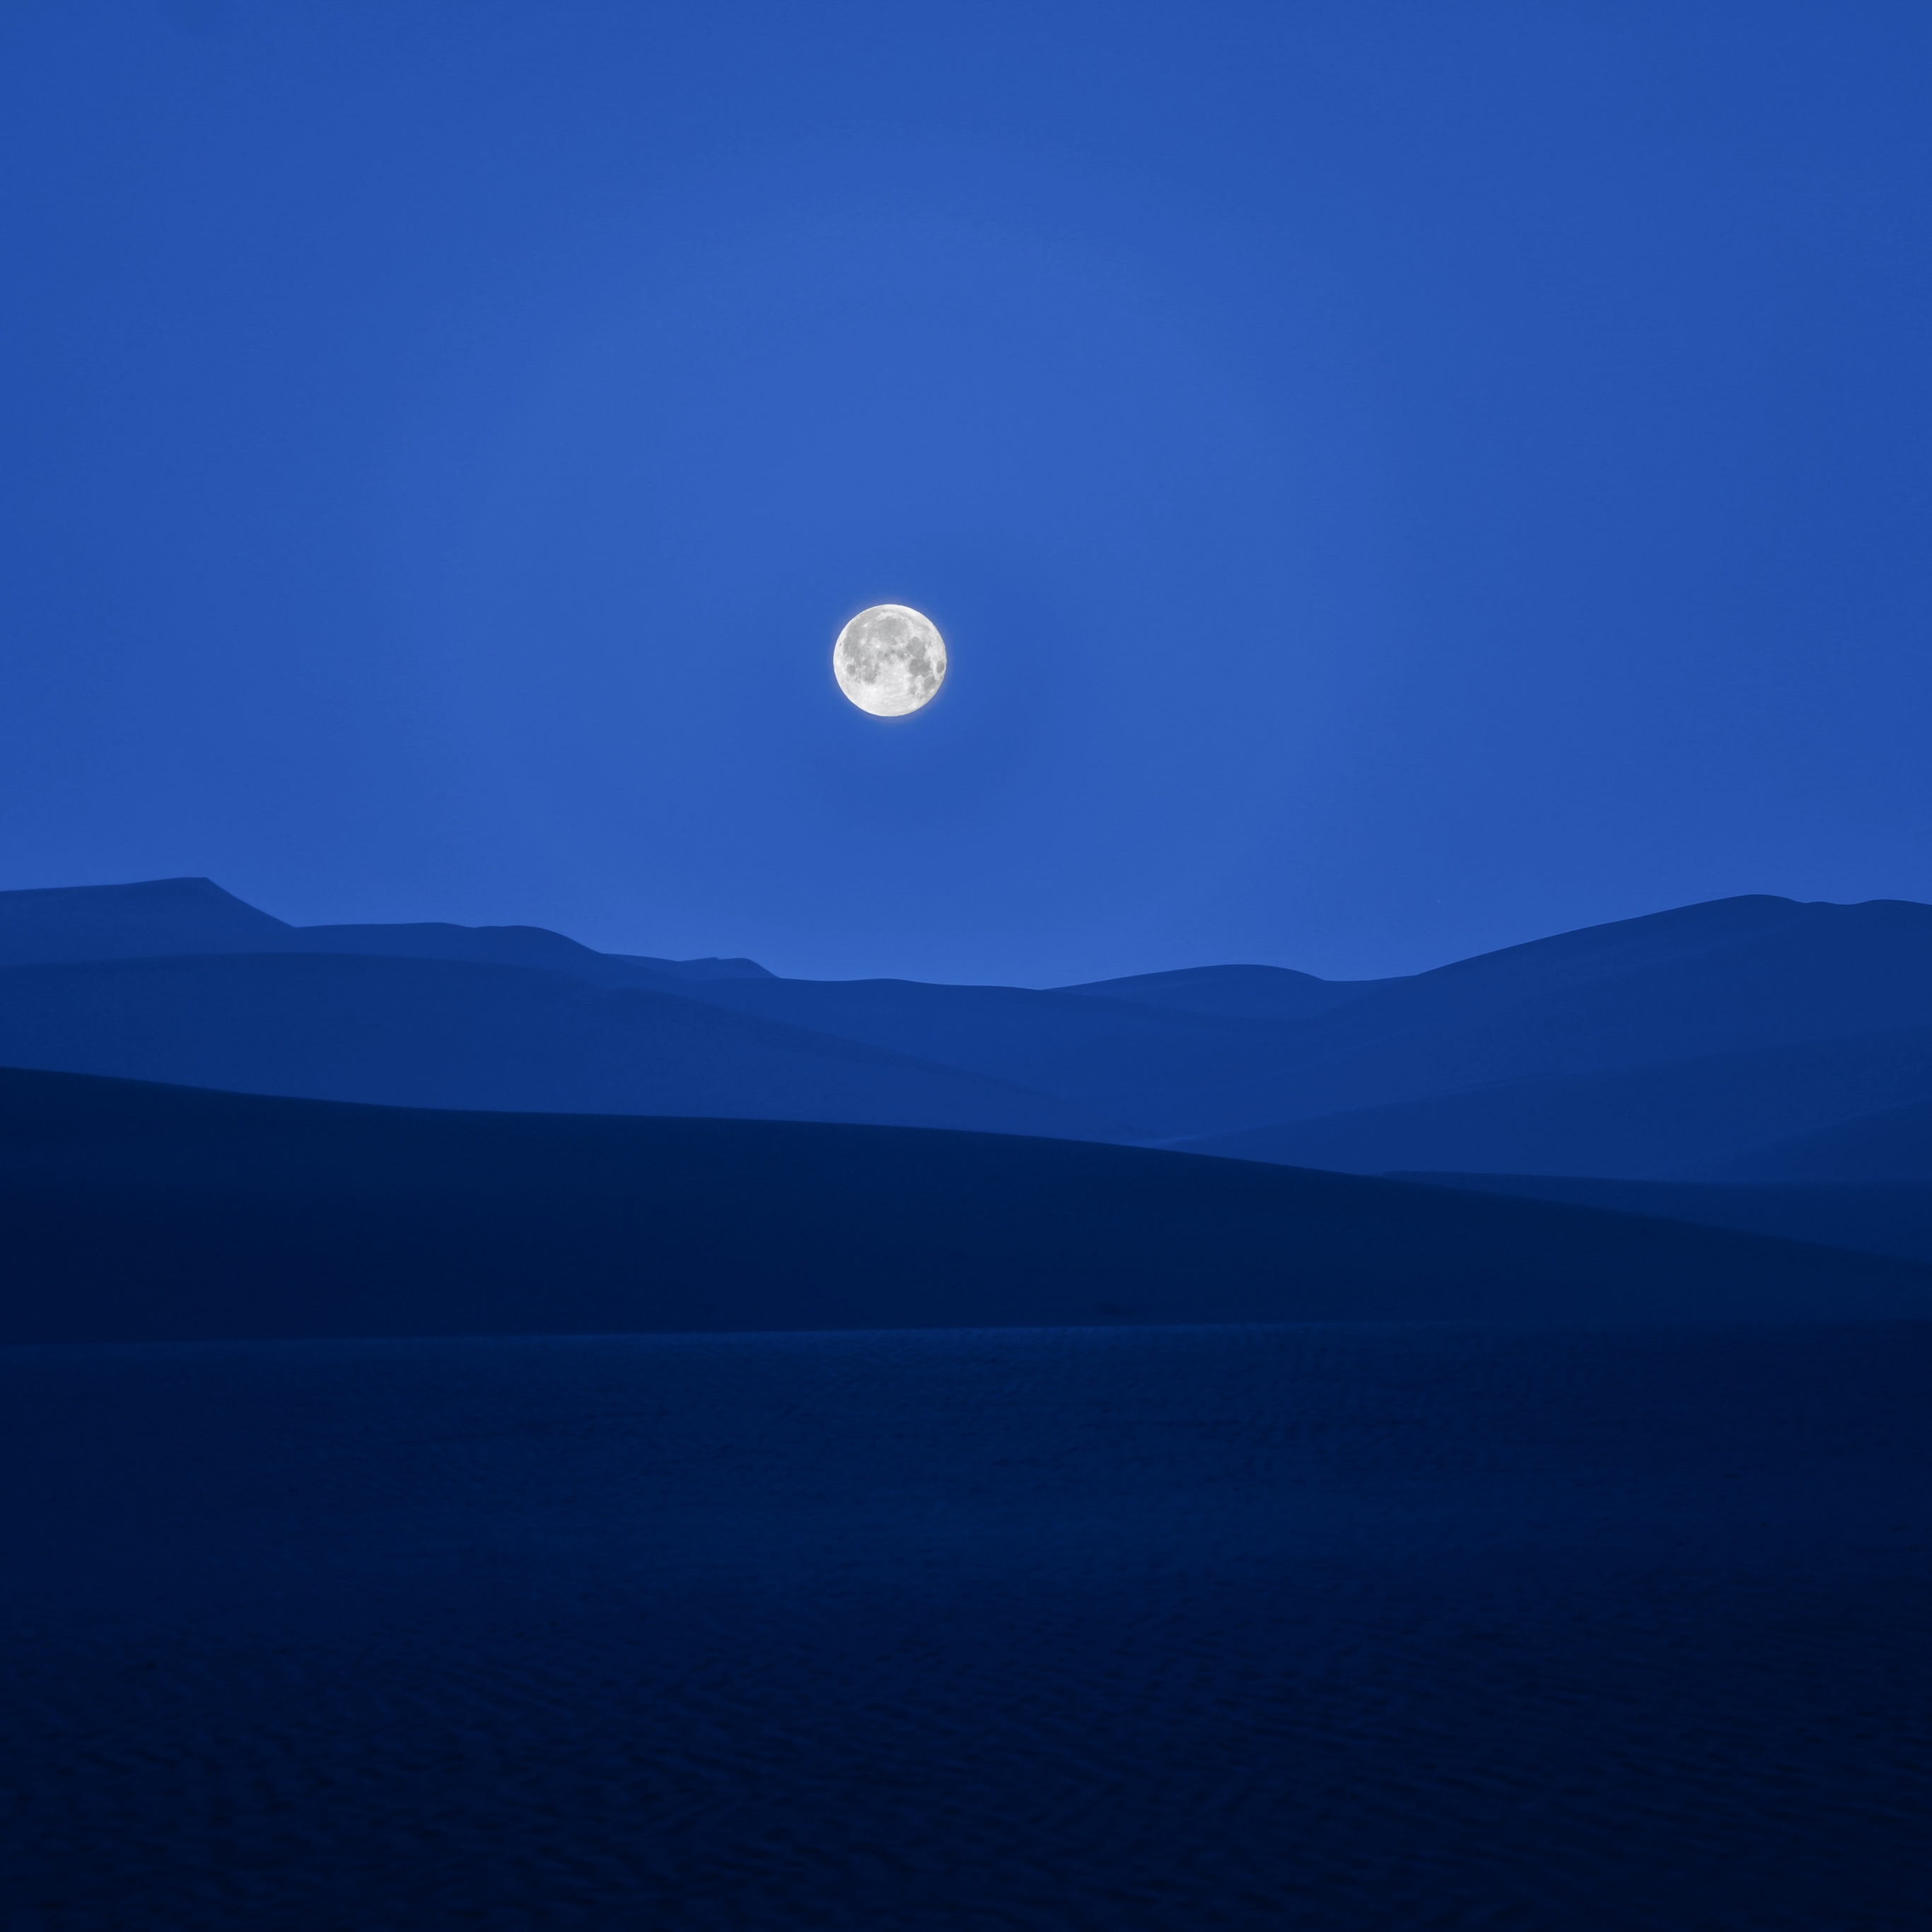 Download A Mountain Landscape With A Moon And Stars Wallpaper